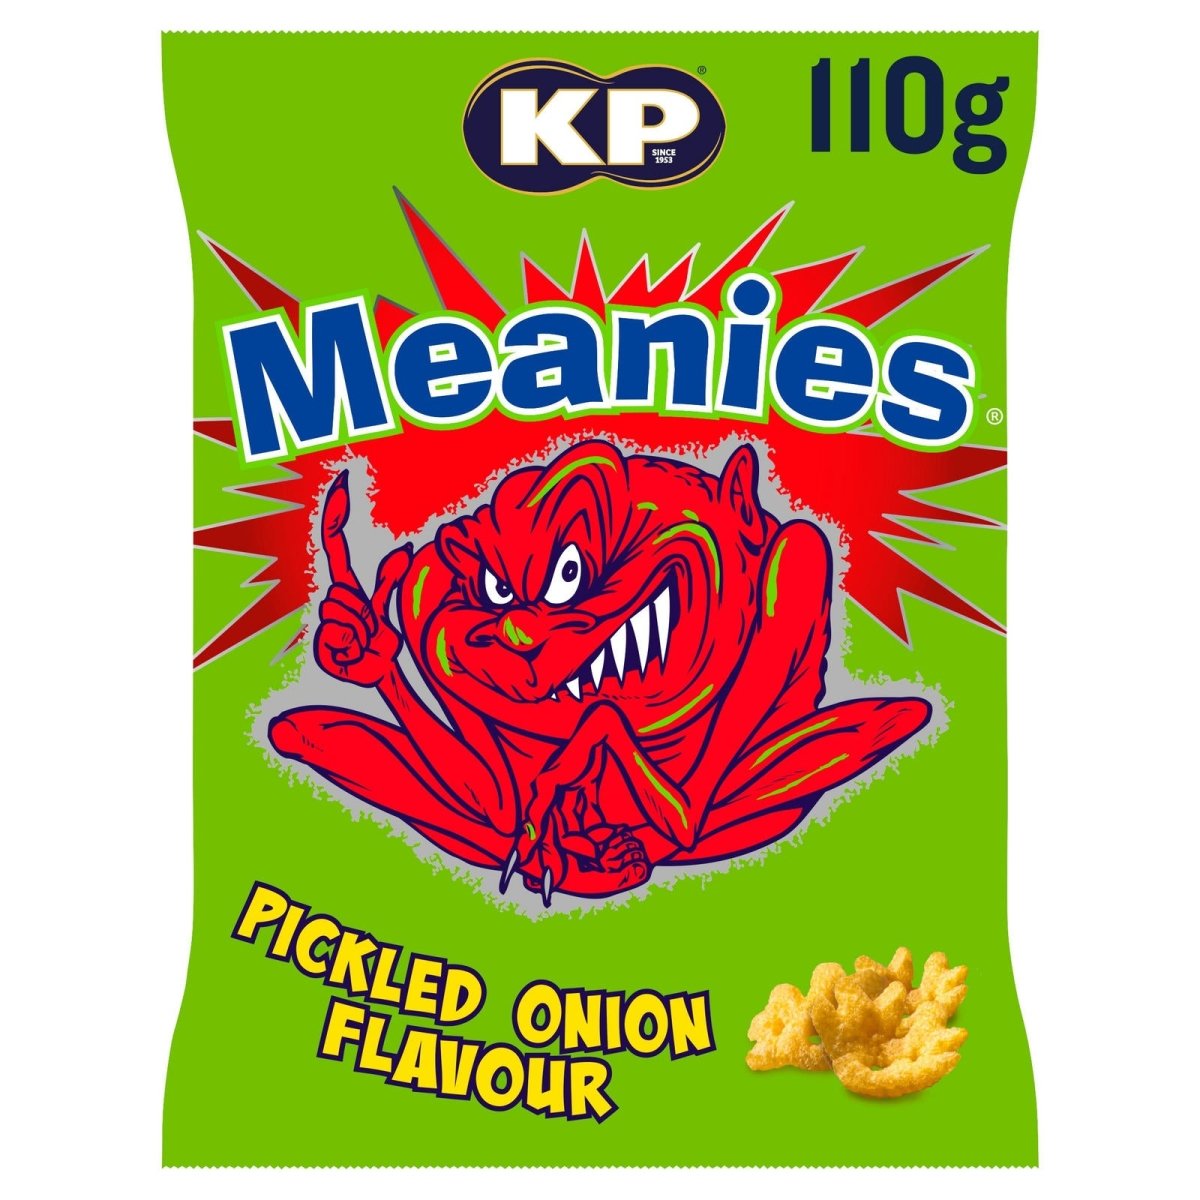 KP Meanies Pickled Onion Flavour 110g - Candy Mail UK